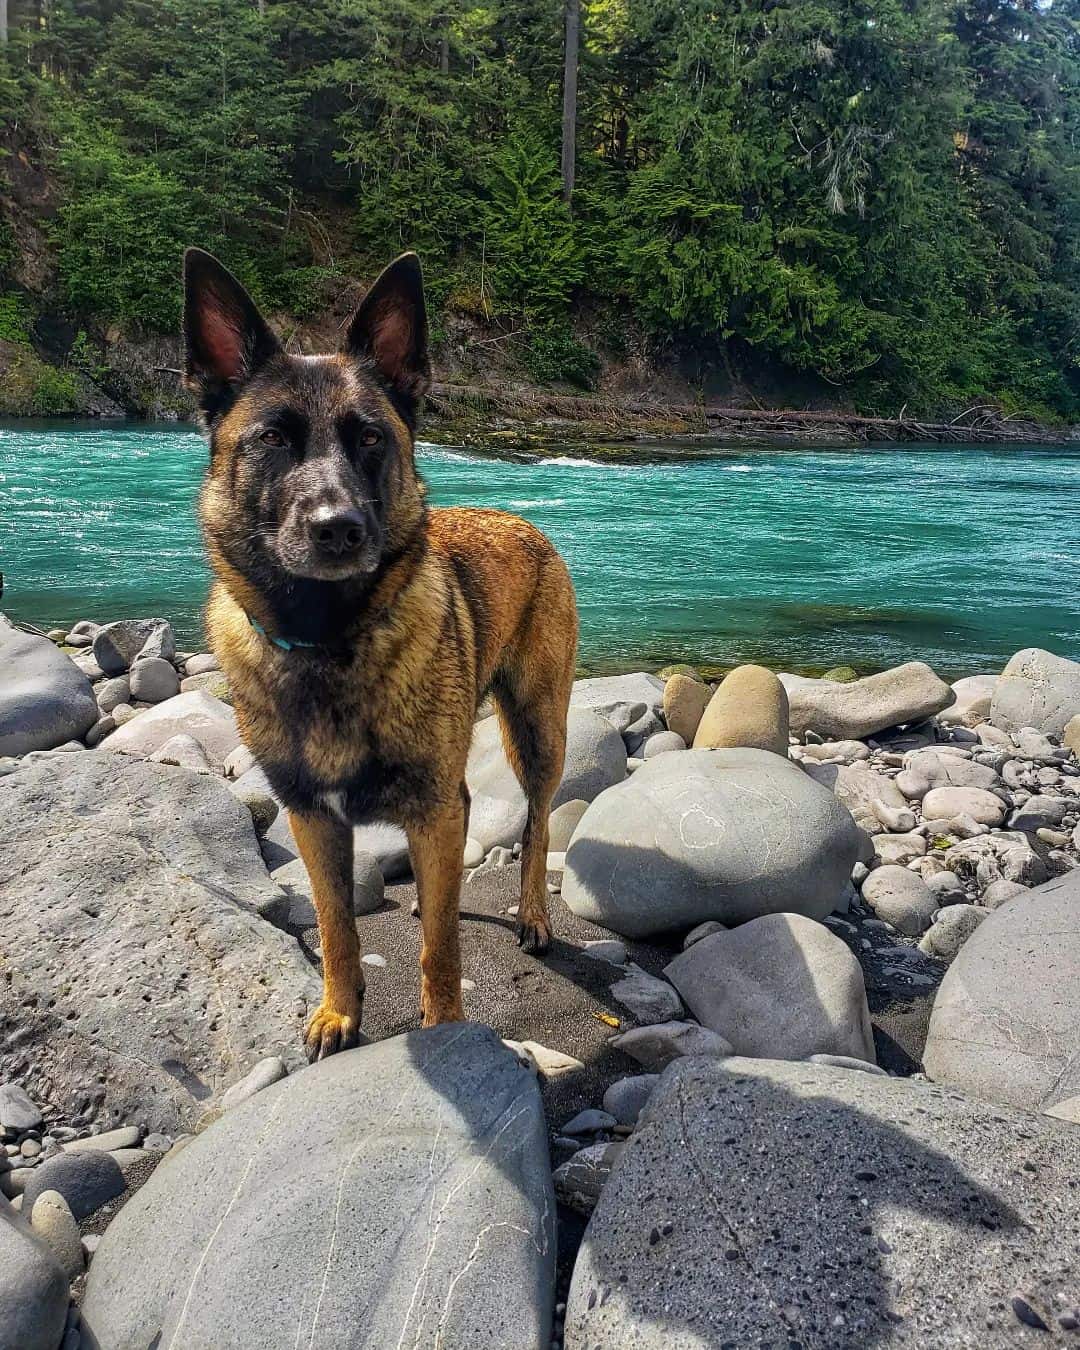 Belgian Malinois German Shepherd Mix stands on the bank of the river